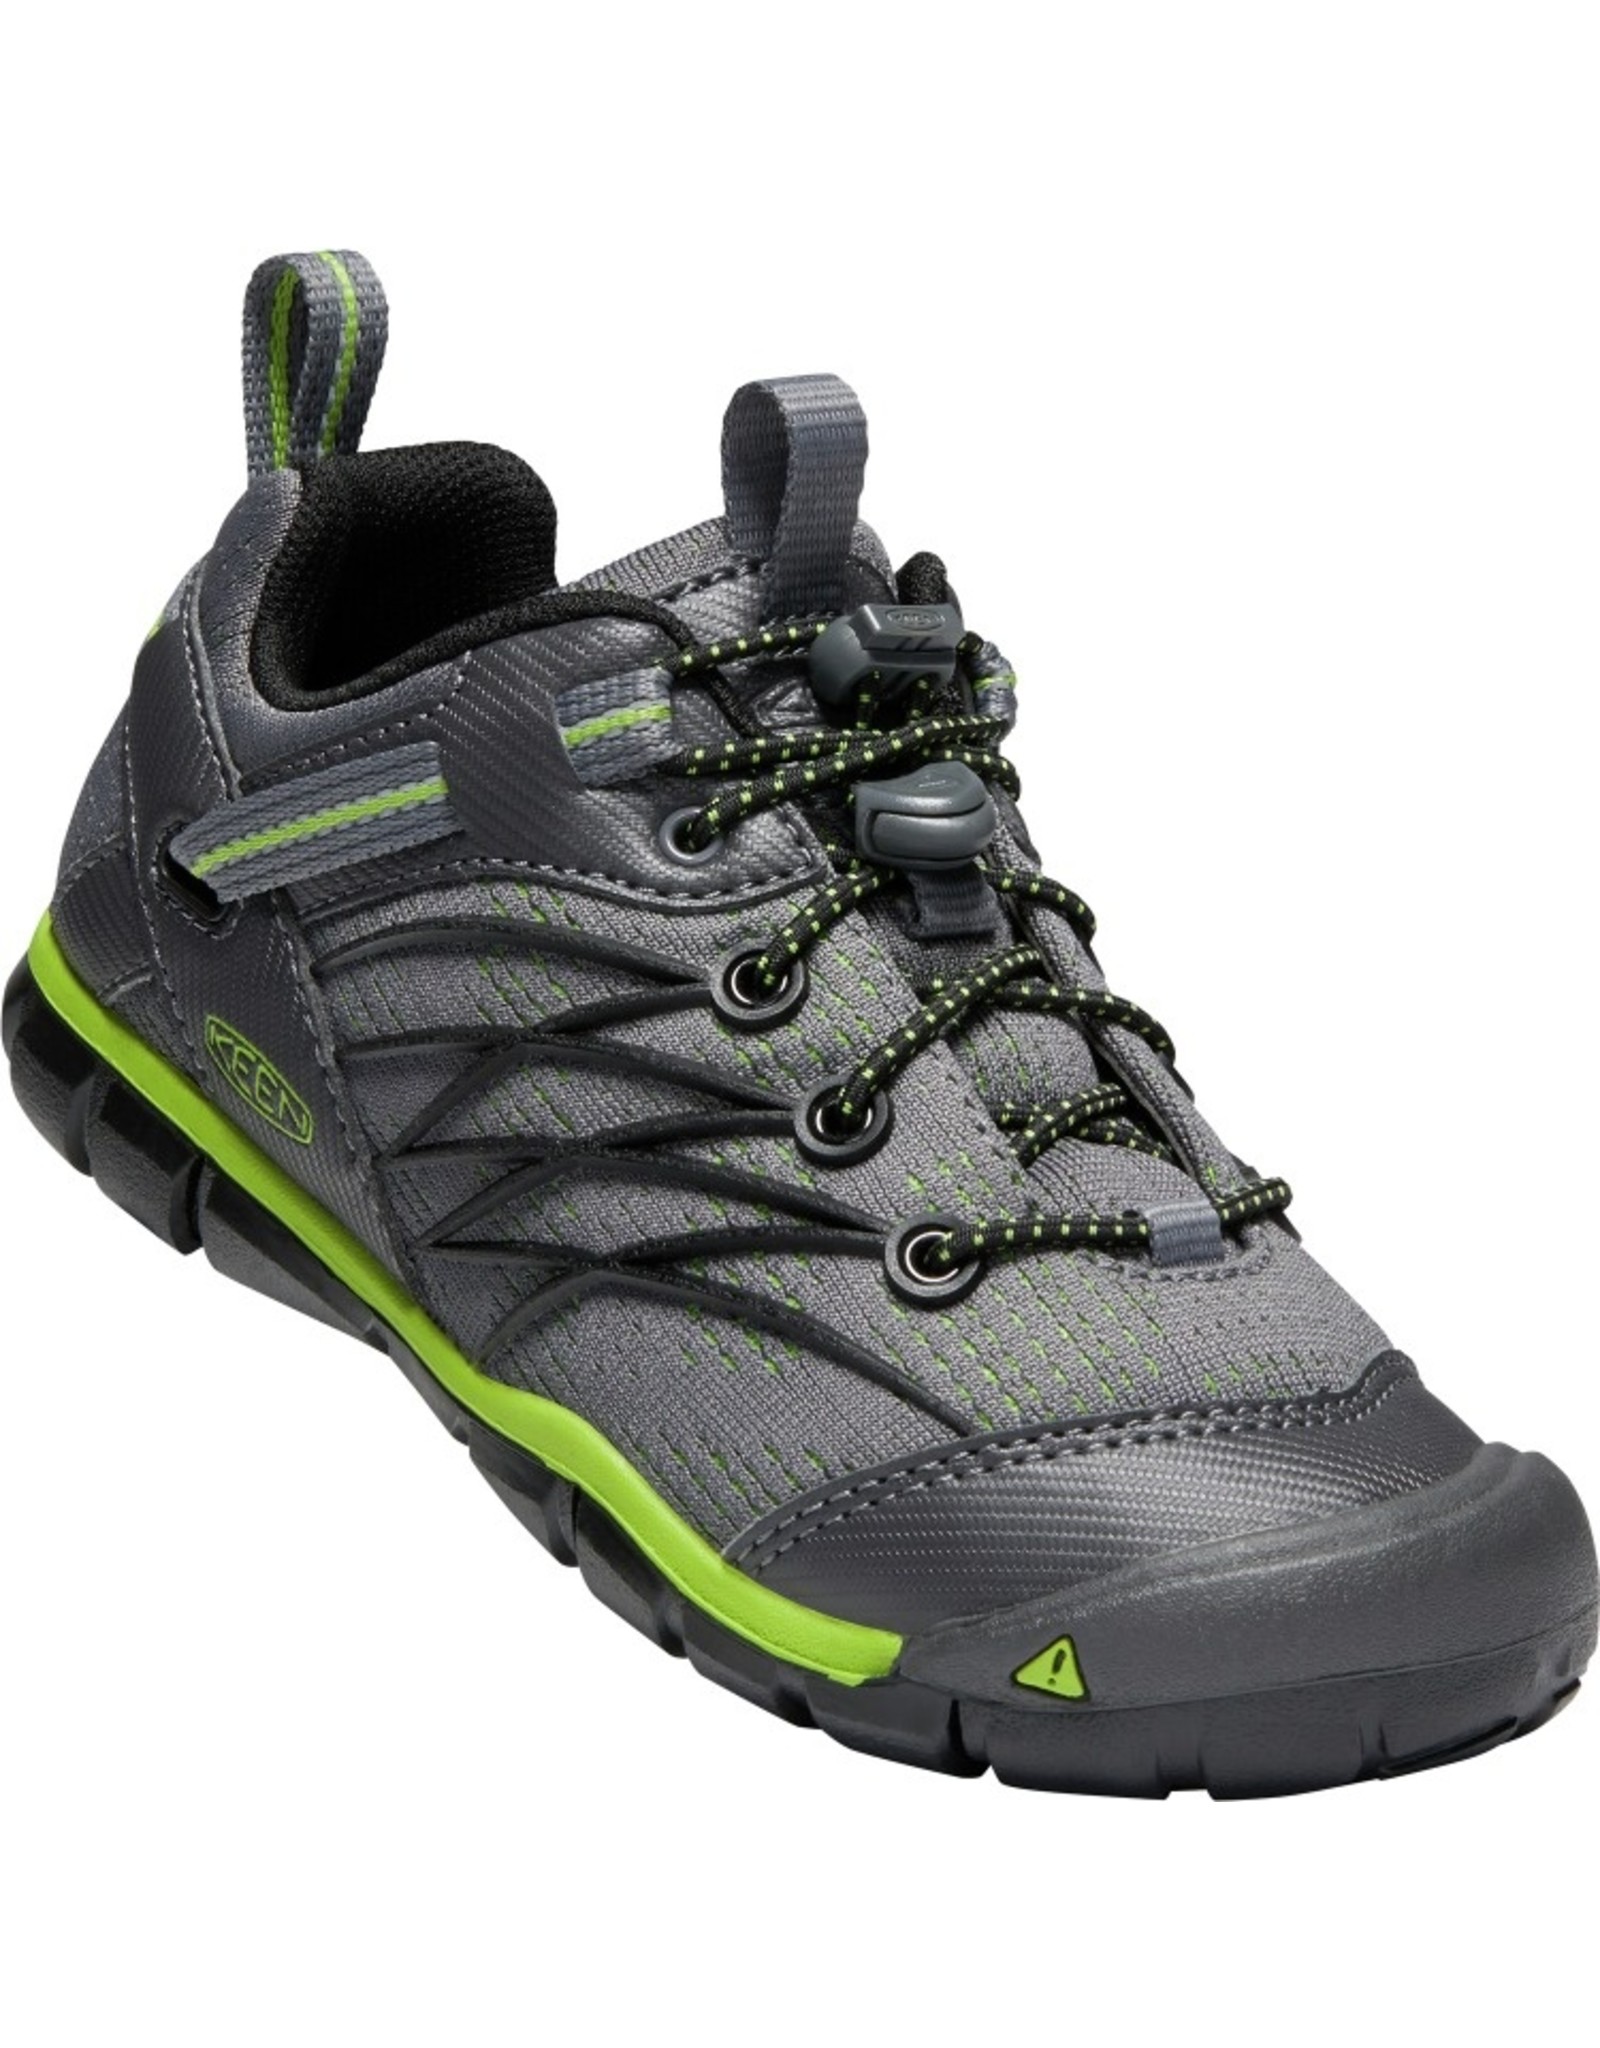 KEEN YOUTH CHANDLER CNX SHOE